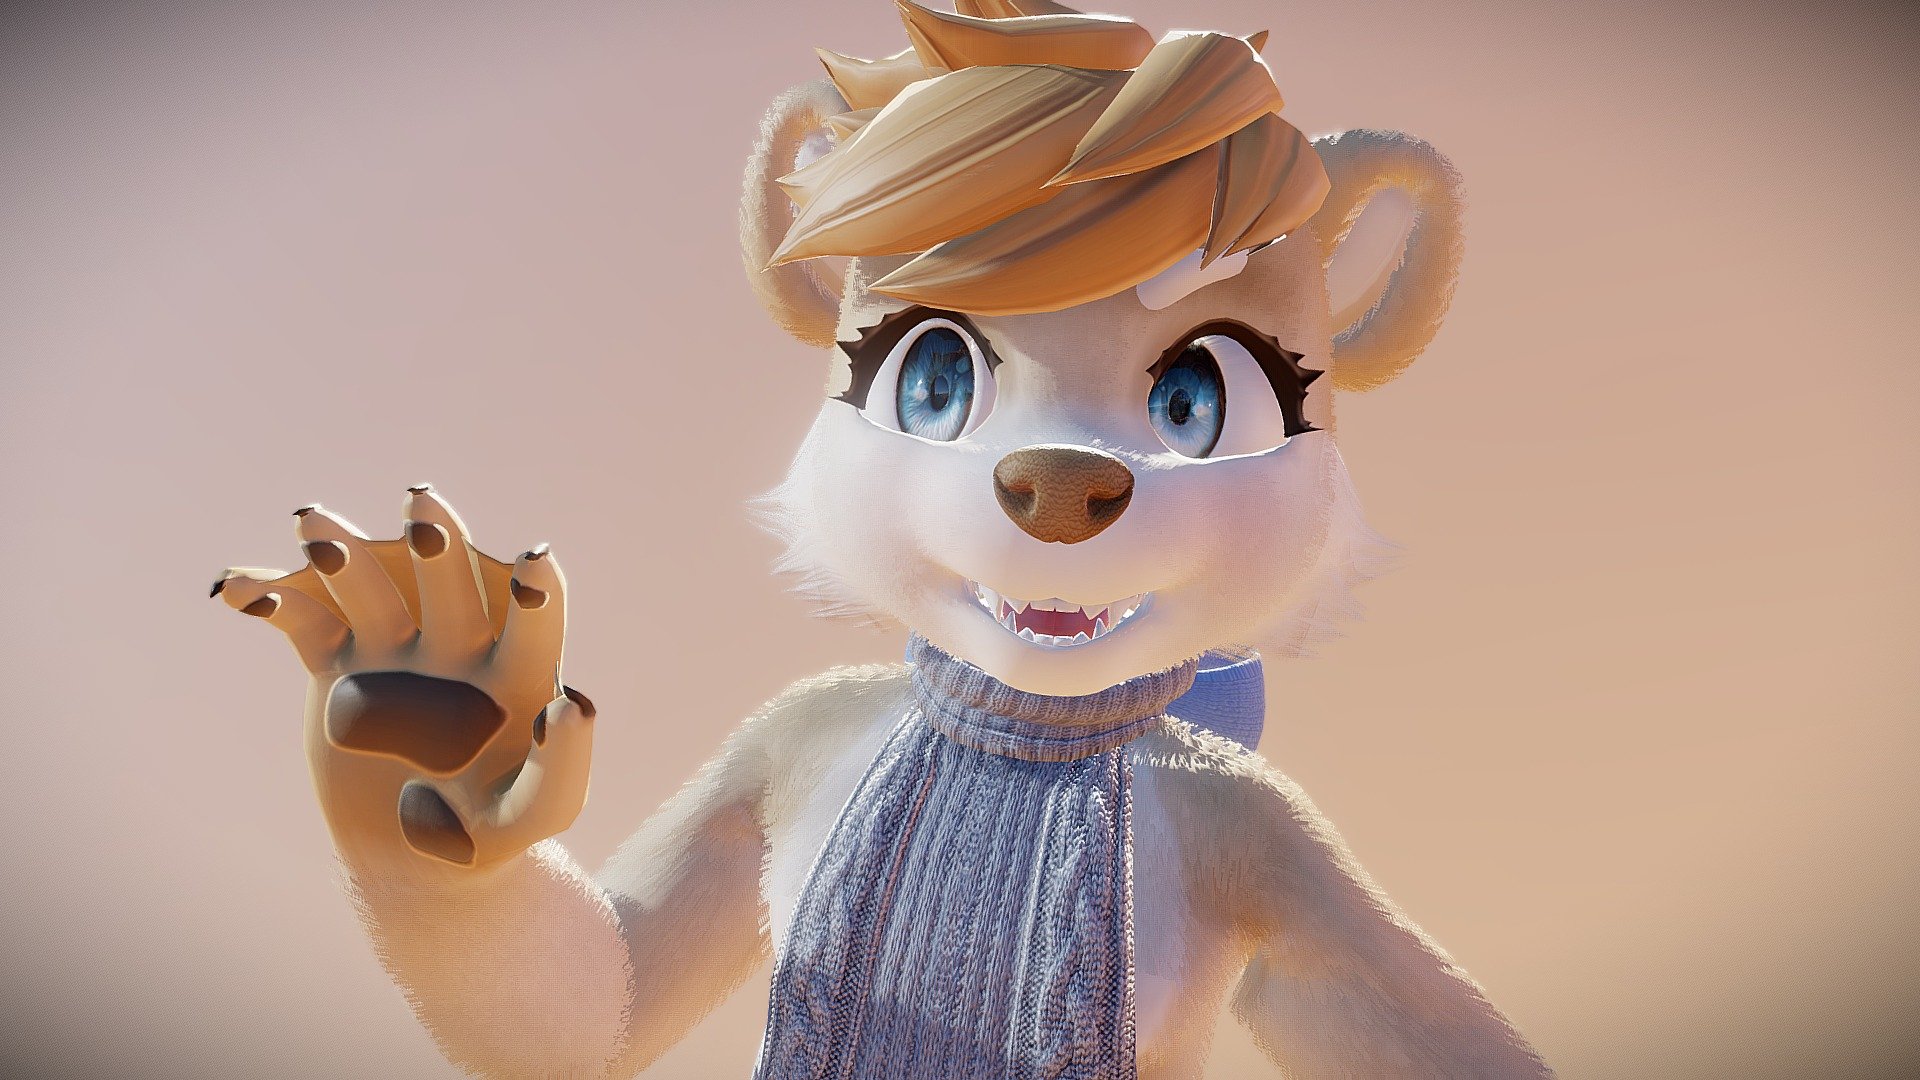 Commissions https://www.furaffinity.net/commissions/hickysnow/ - Reks - 3D model by HickySnow (@Hicky_Snow) 3d model